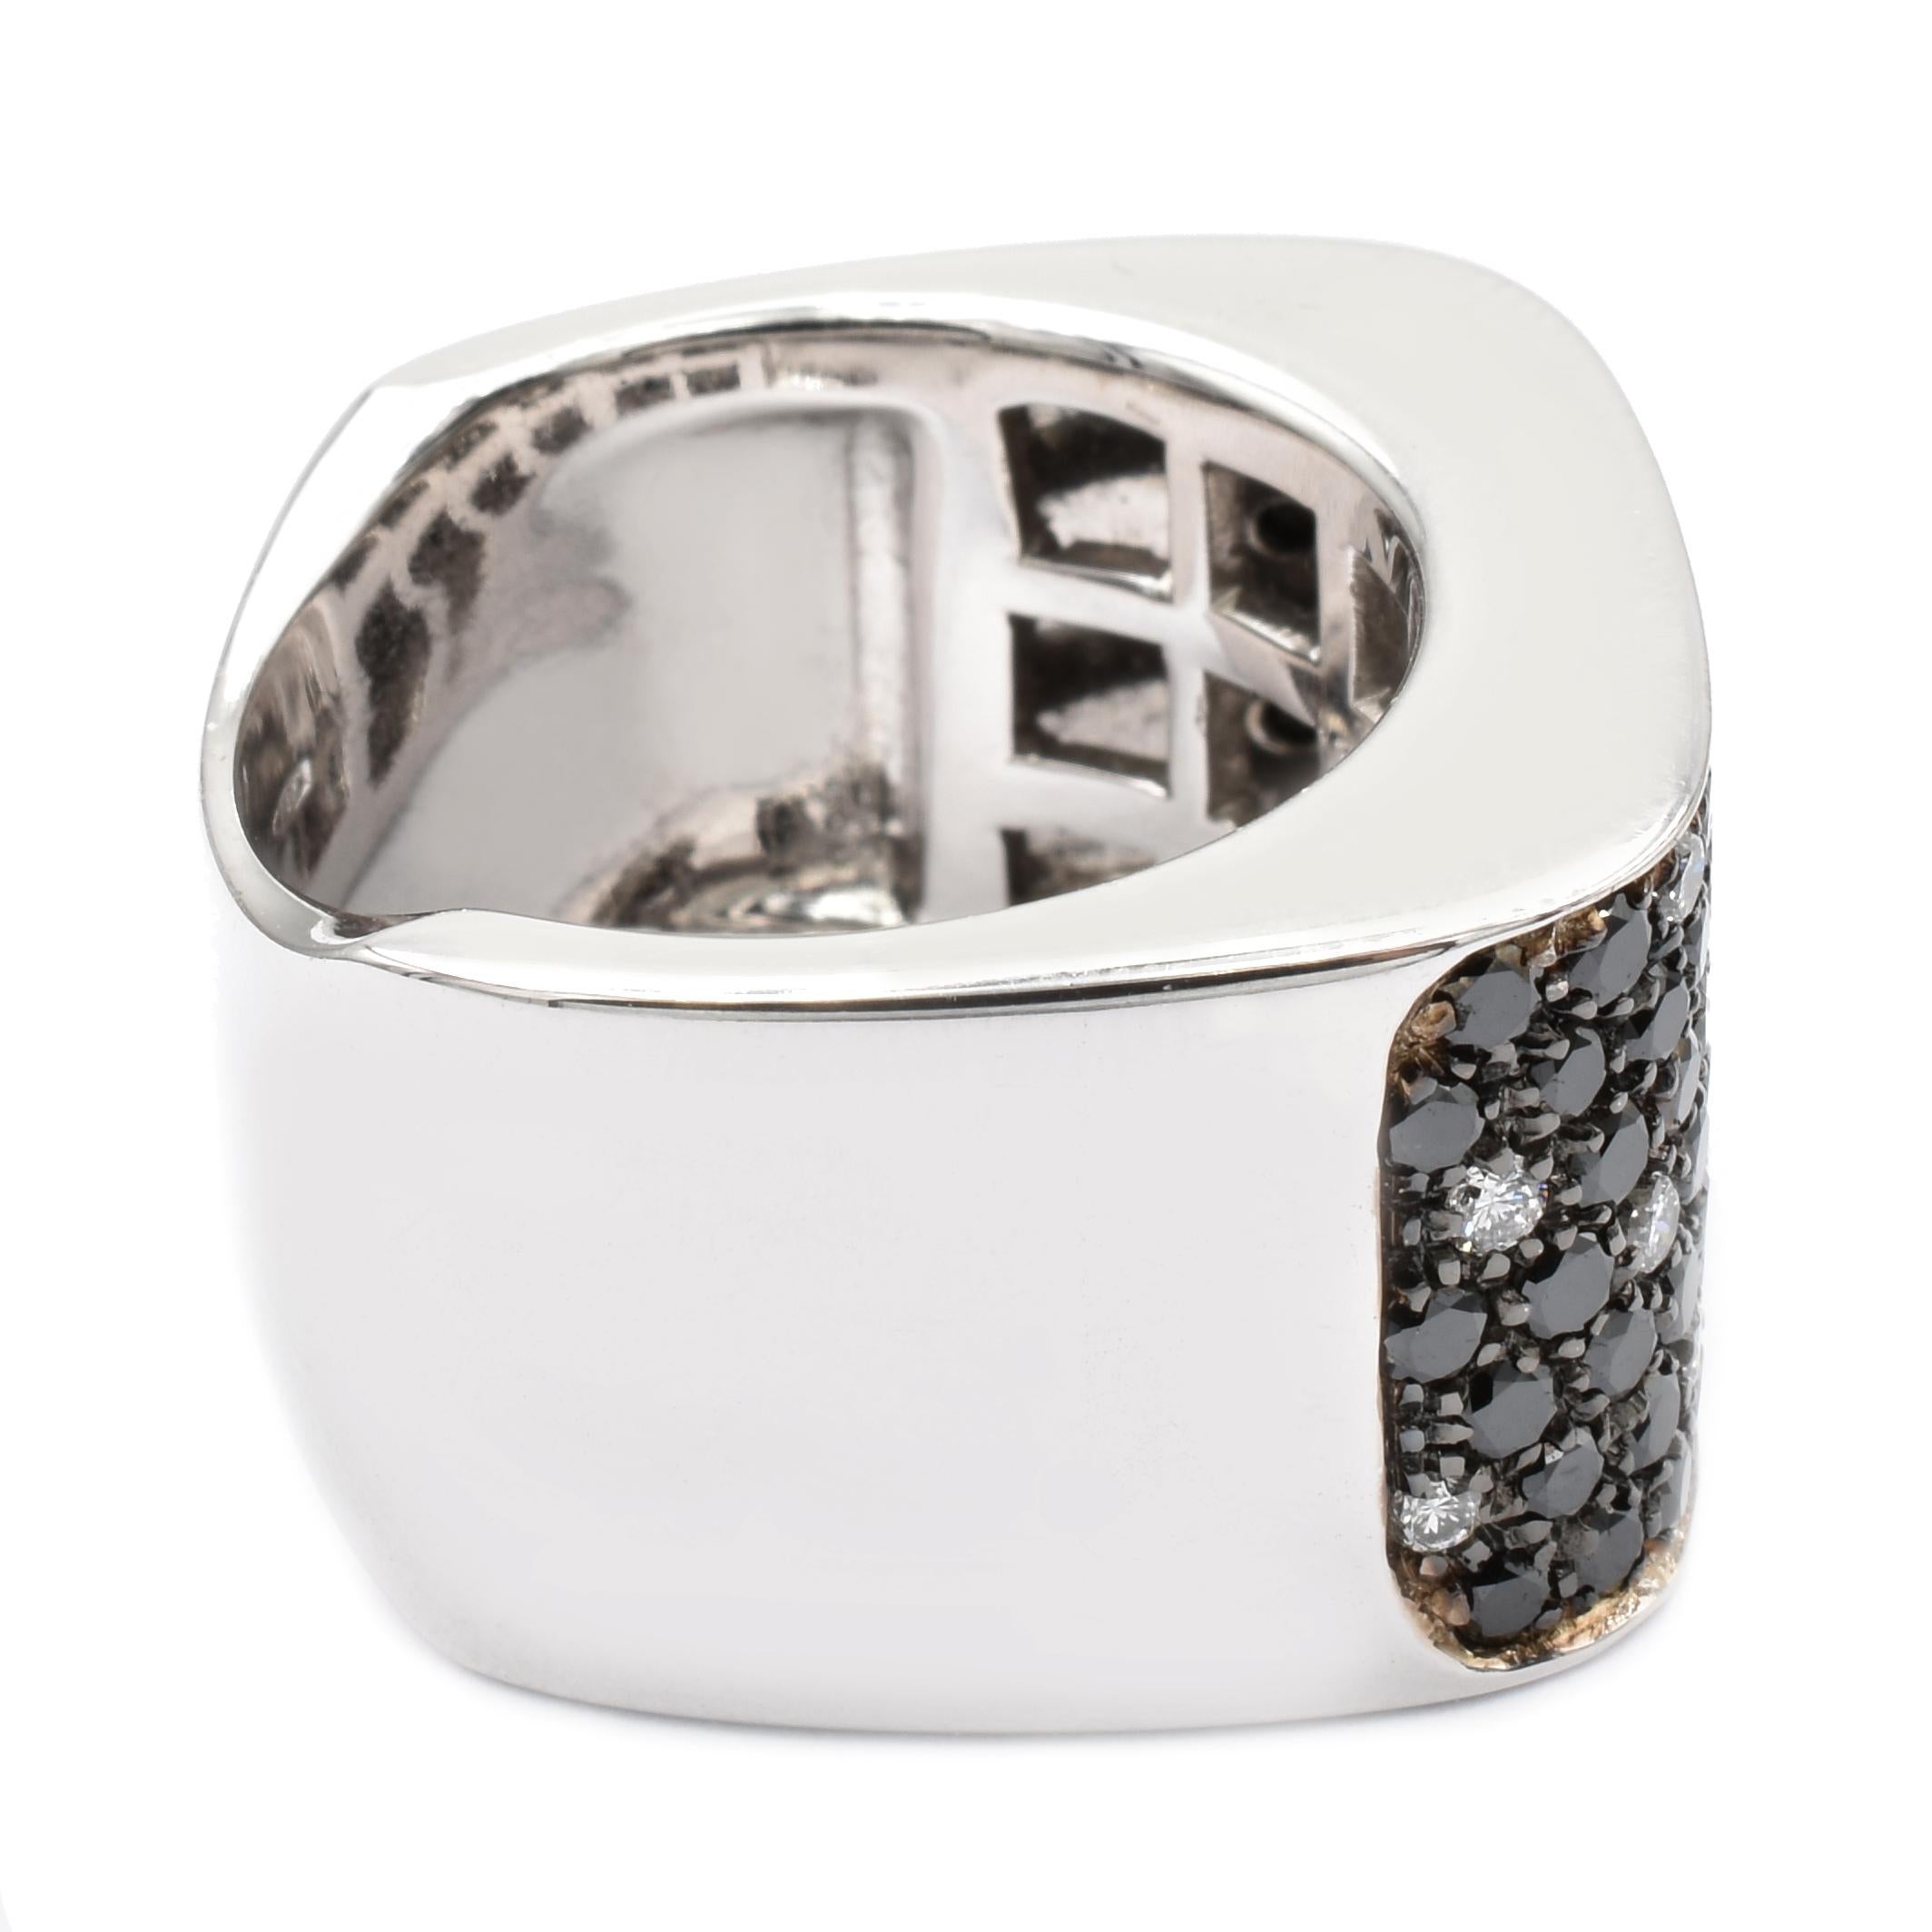 Women's Diamond Paveè Black and White Gold Square Ring Made in Italy